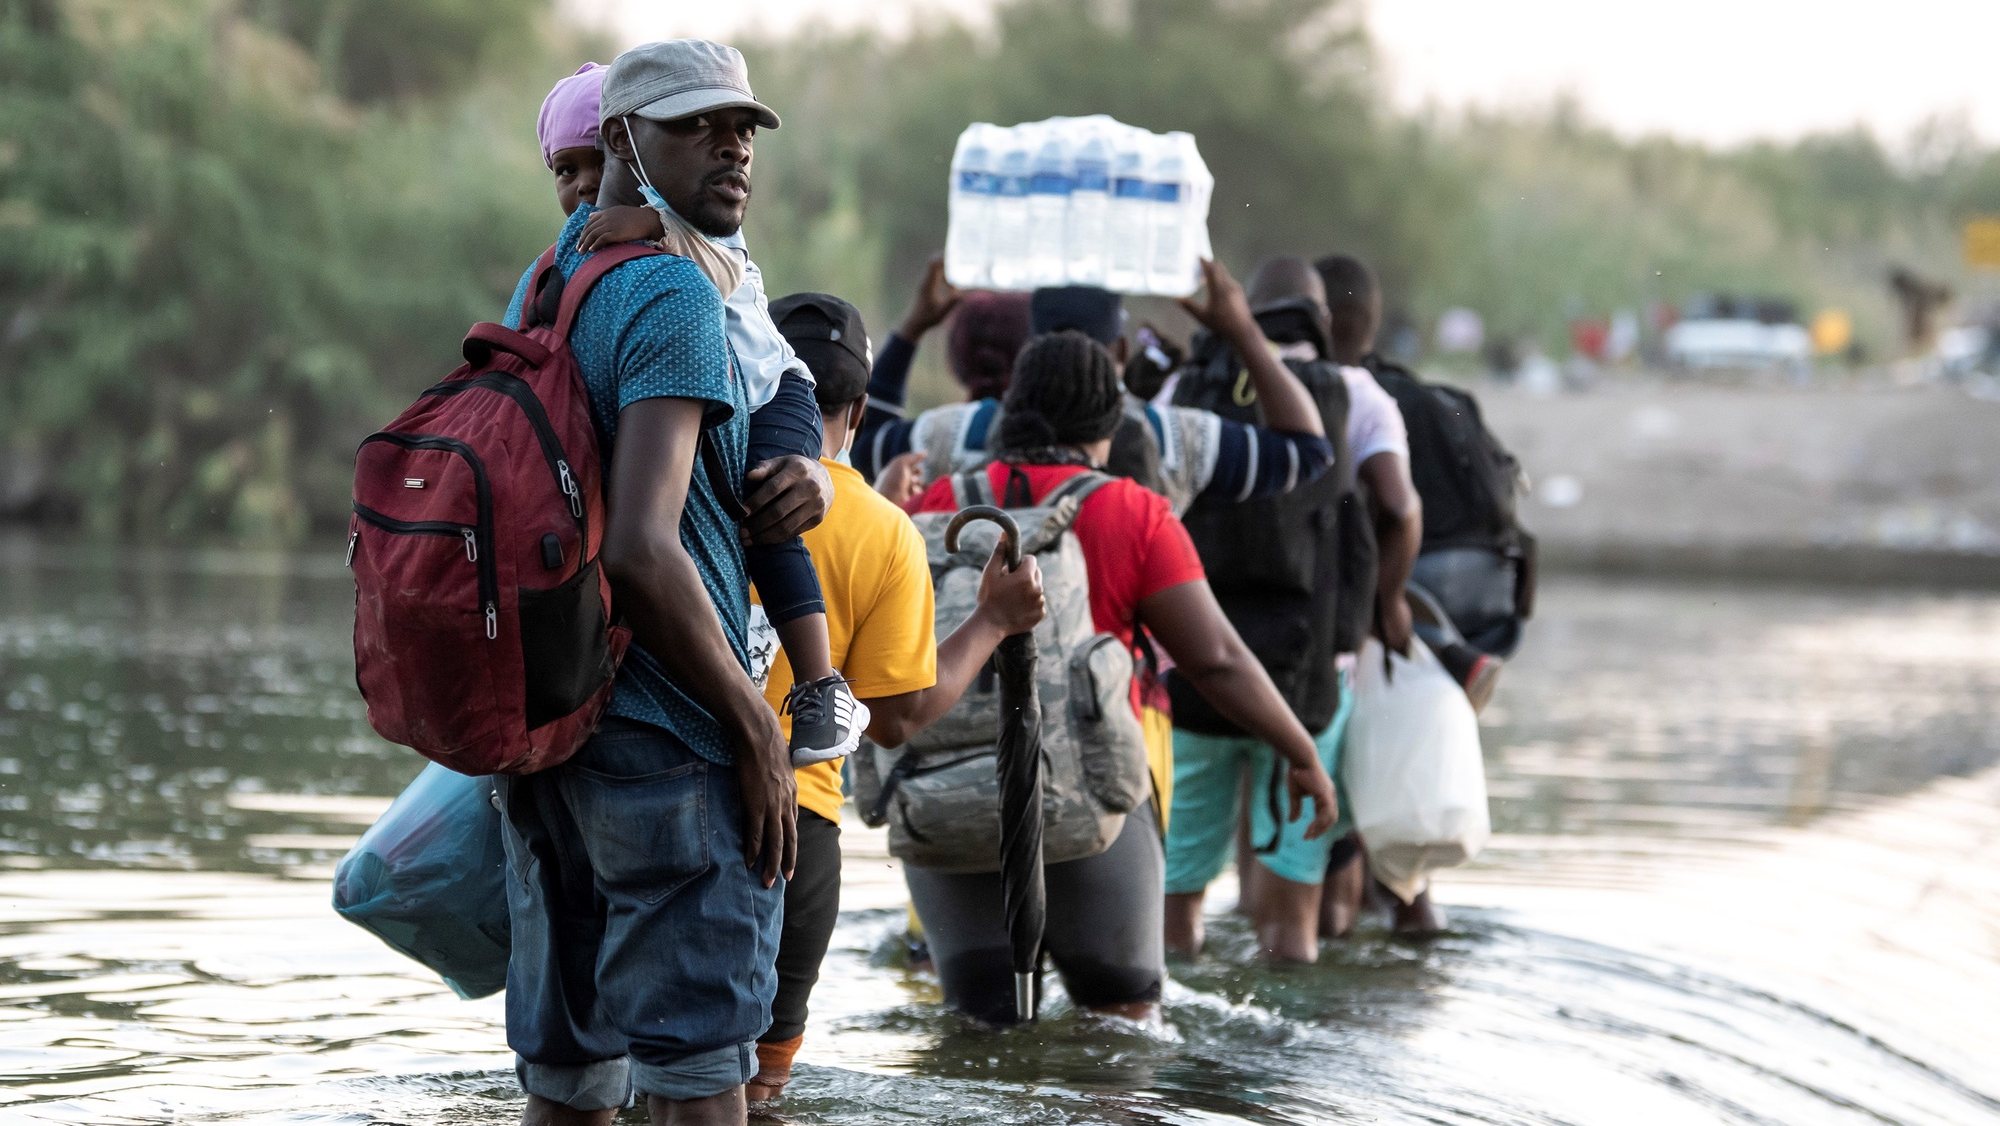 epa09475512 A group of Haitian migrants begin to cross the Rio Grande, on the border of Ciudad Acuna, Mexico, 18 September 2021. More than 10,000 migrants have arrived in the border cities of Del Rio Texas in the United States and Ciudad Acuna in Mexico in recent days and are waiting under the International Bridge for the asylum application to be processed by the United States authorities.  EPA/Miguel Sierra